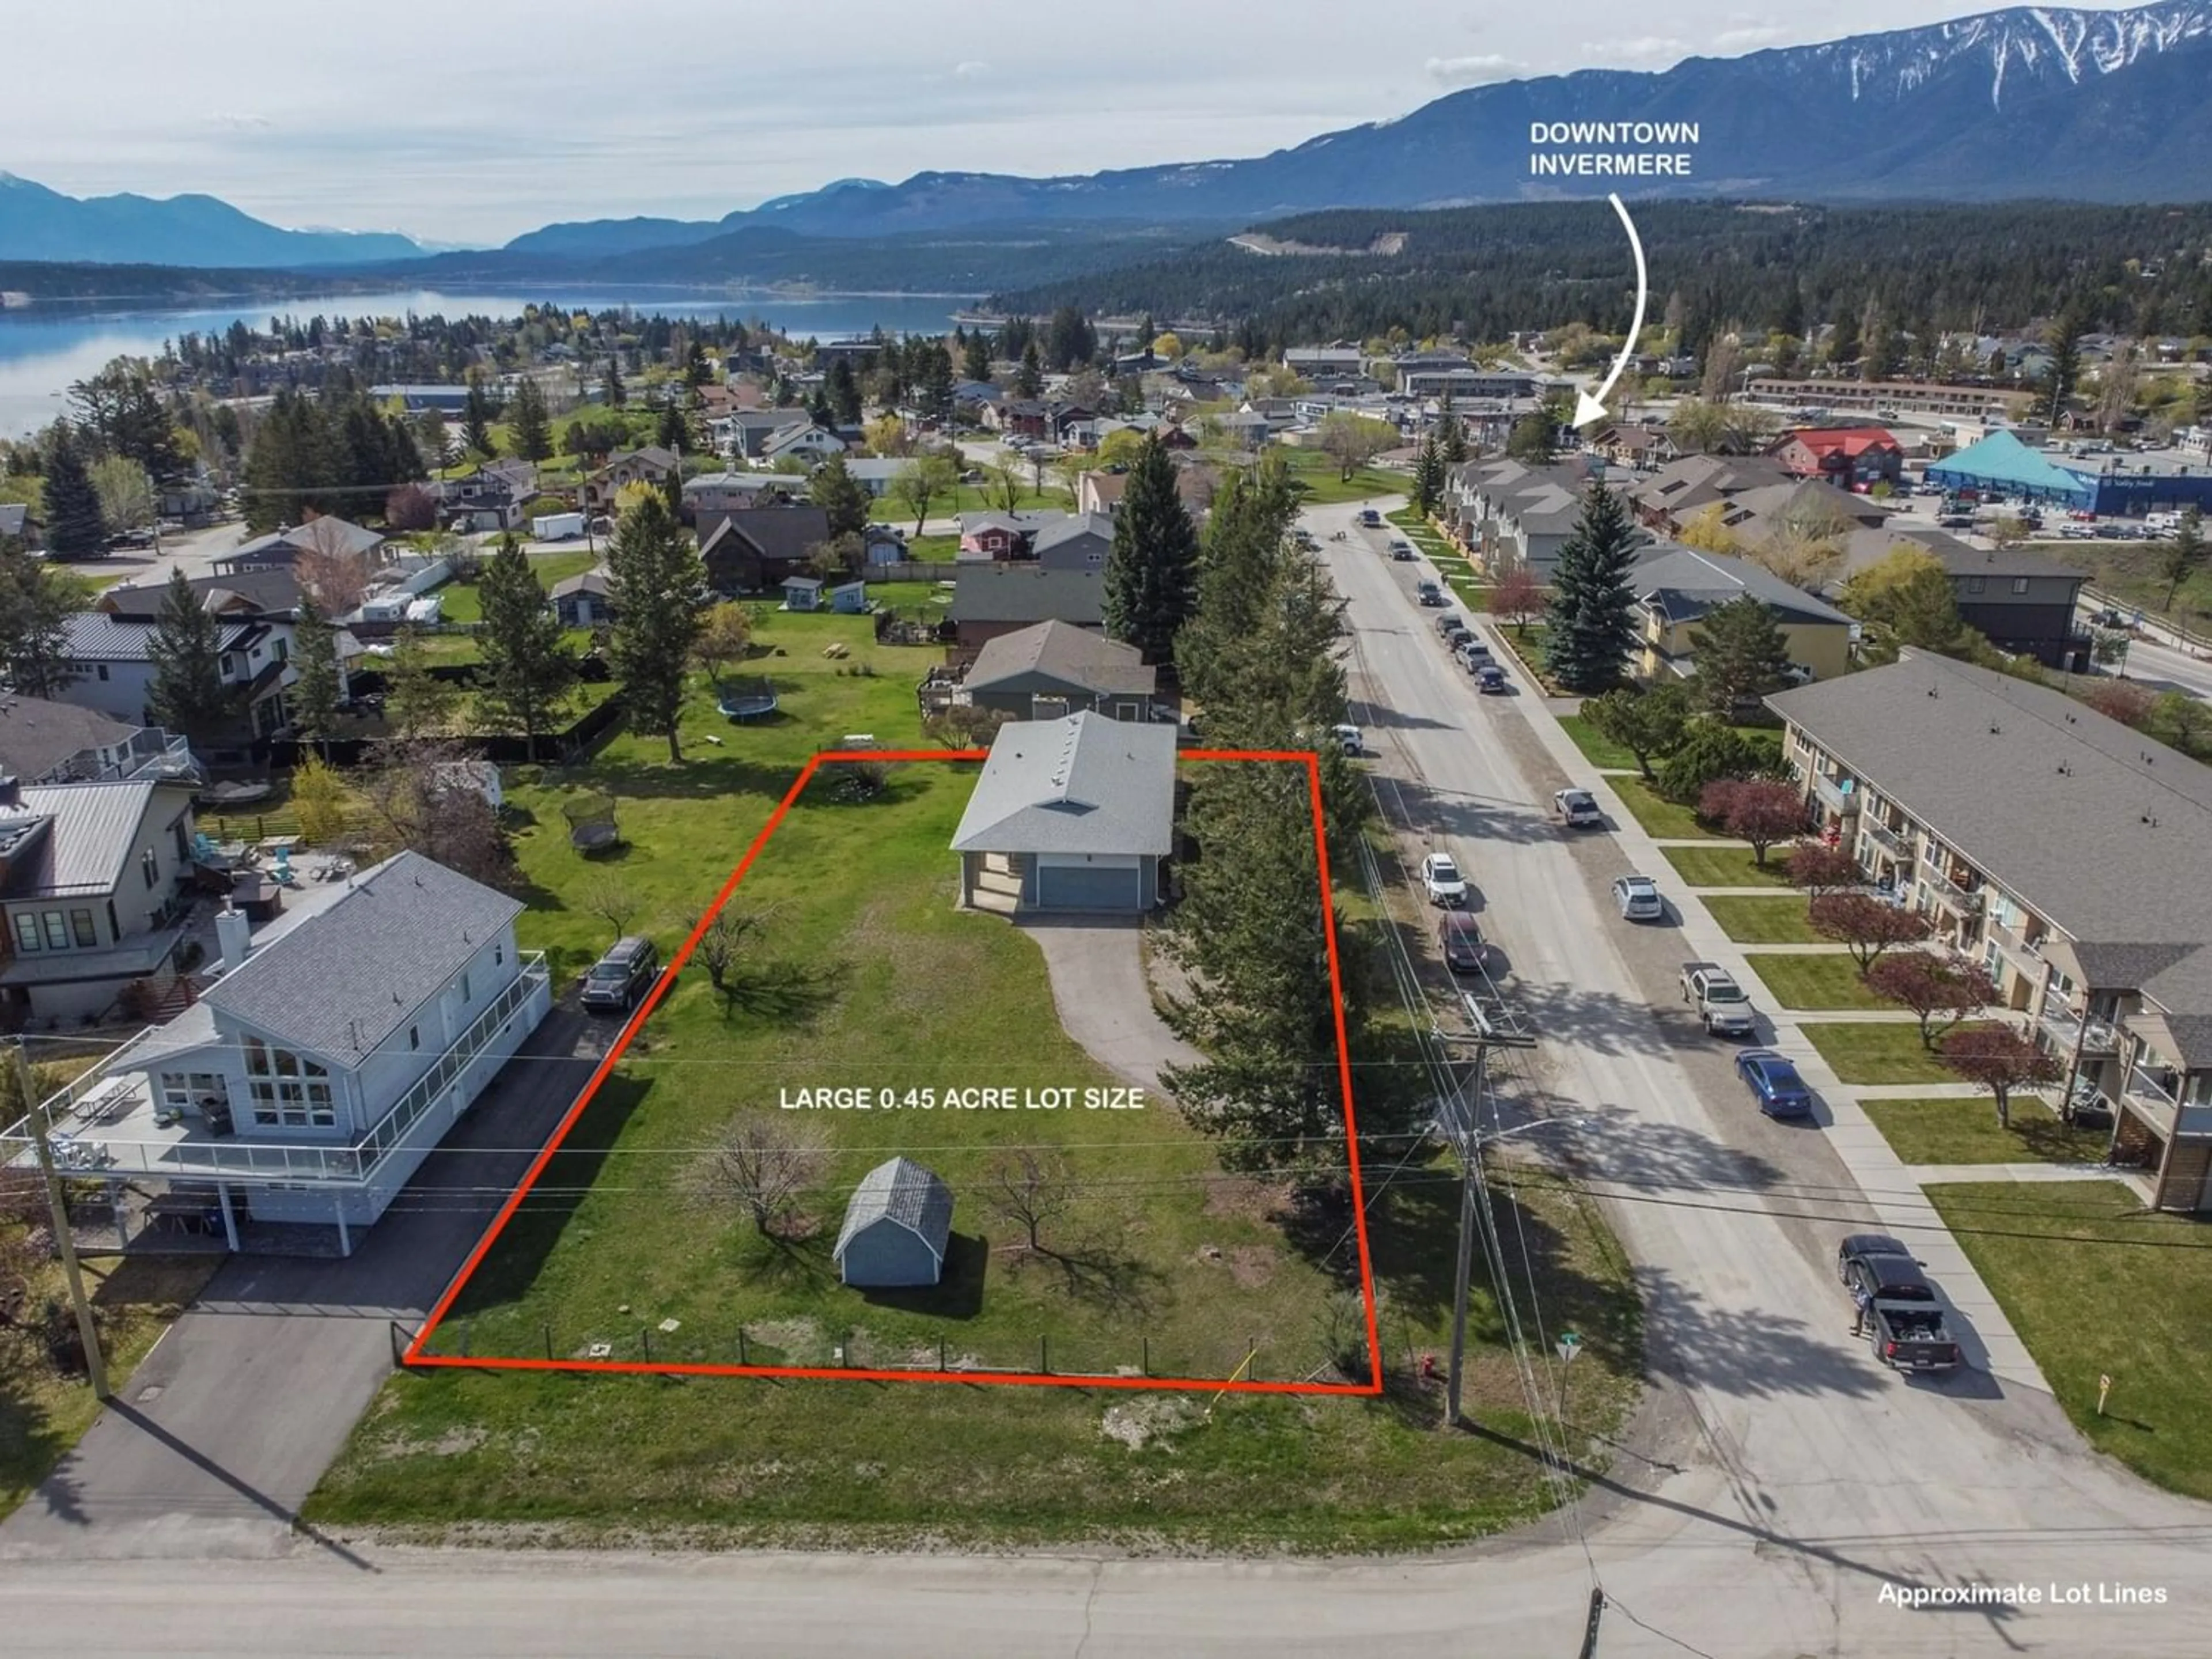 Lakeview for 417 6TH AVENUE, Invermere British Columbia V0A1K0